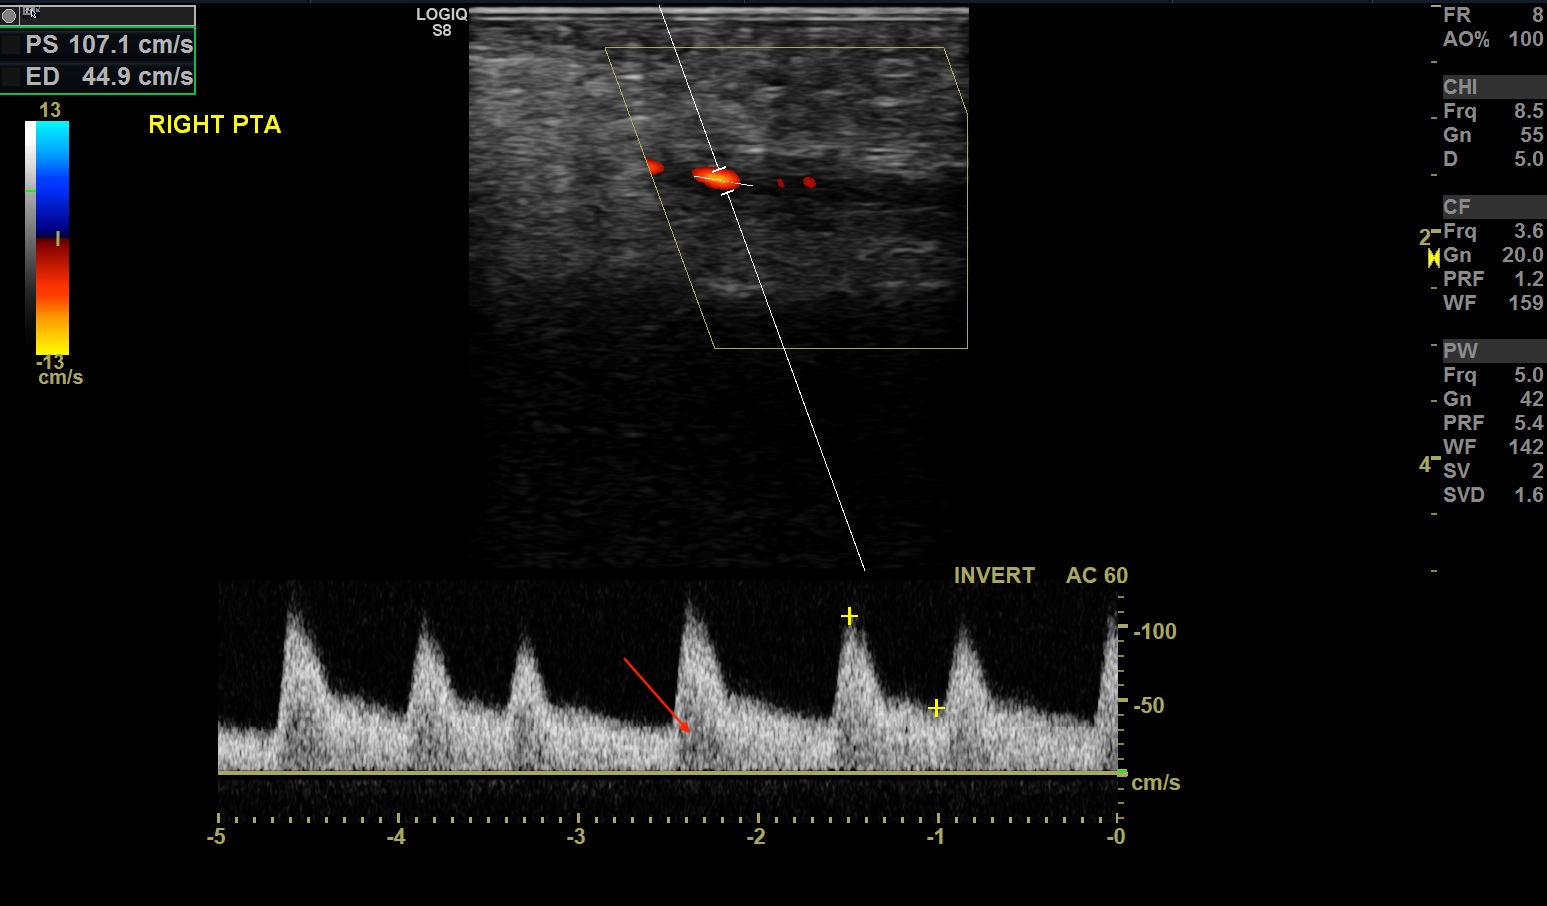 Doppler ultrasound of the right posterior tibial artery showing classic monophasic waveform